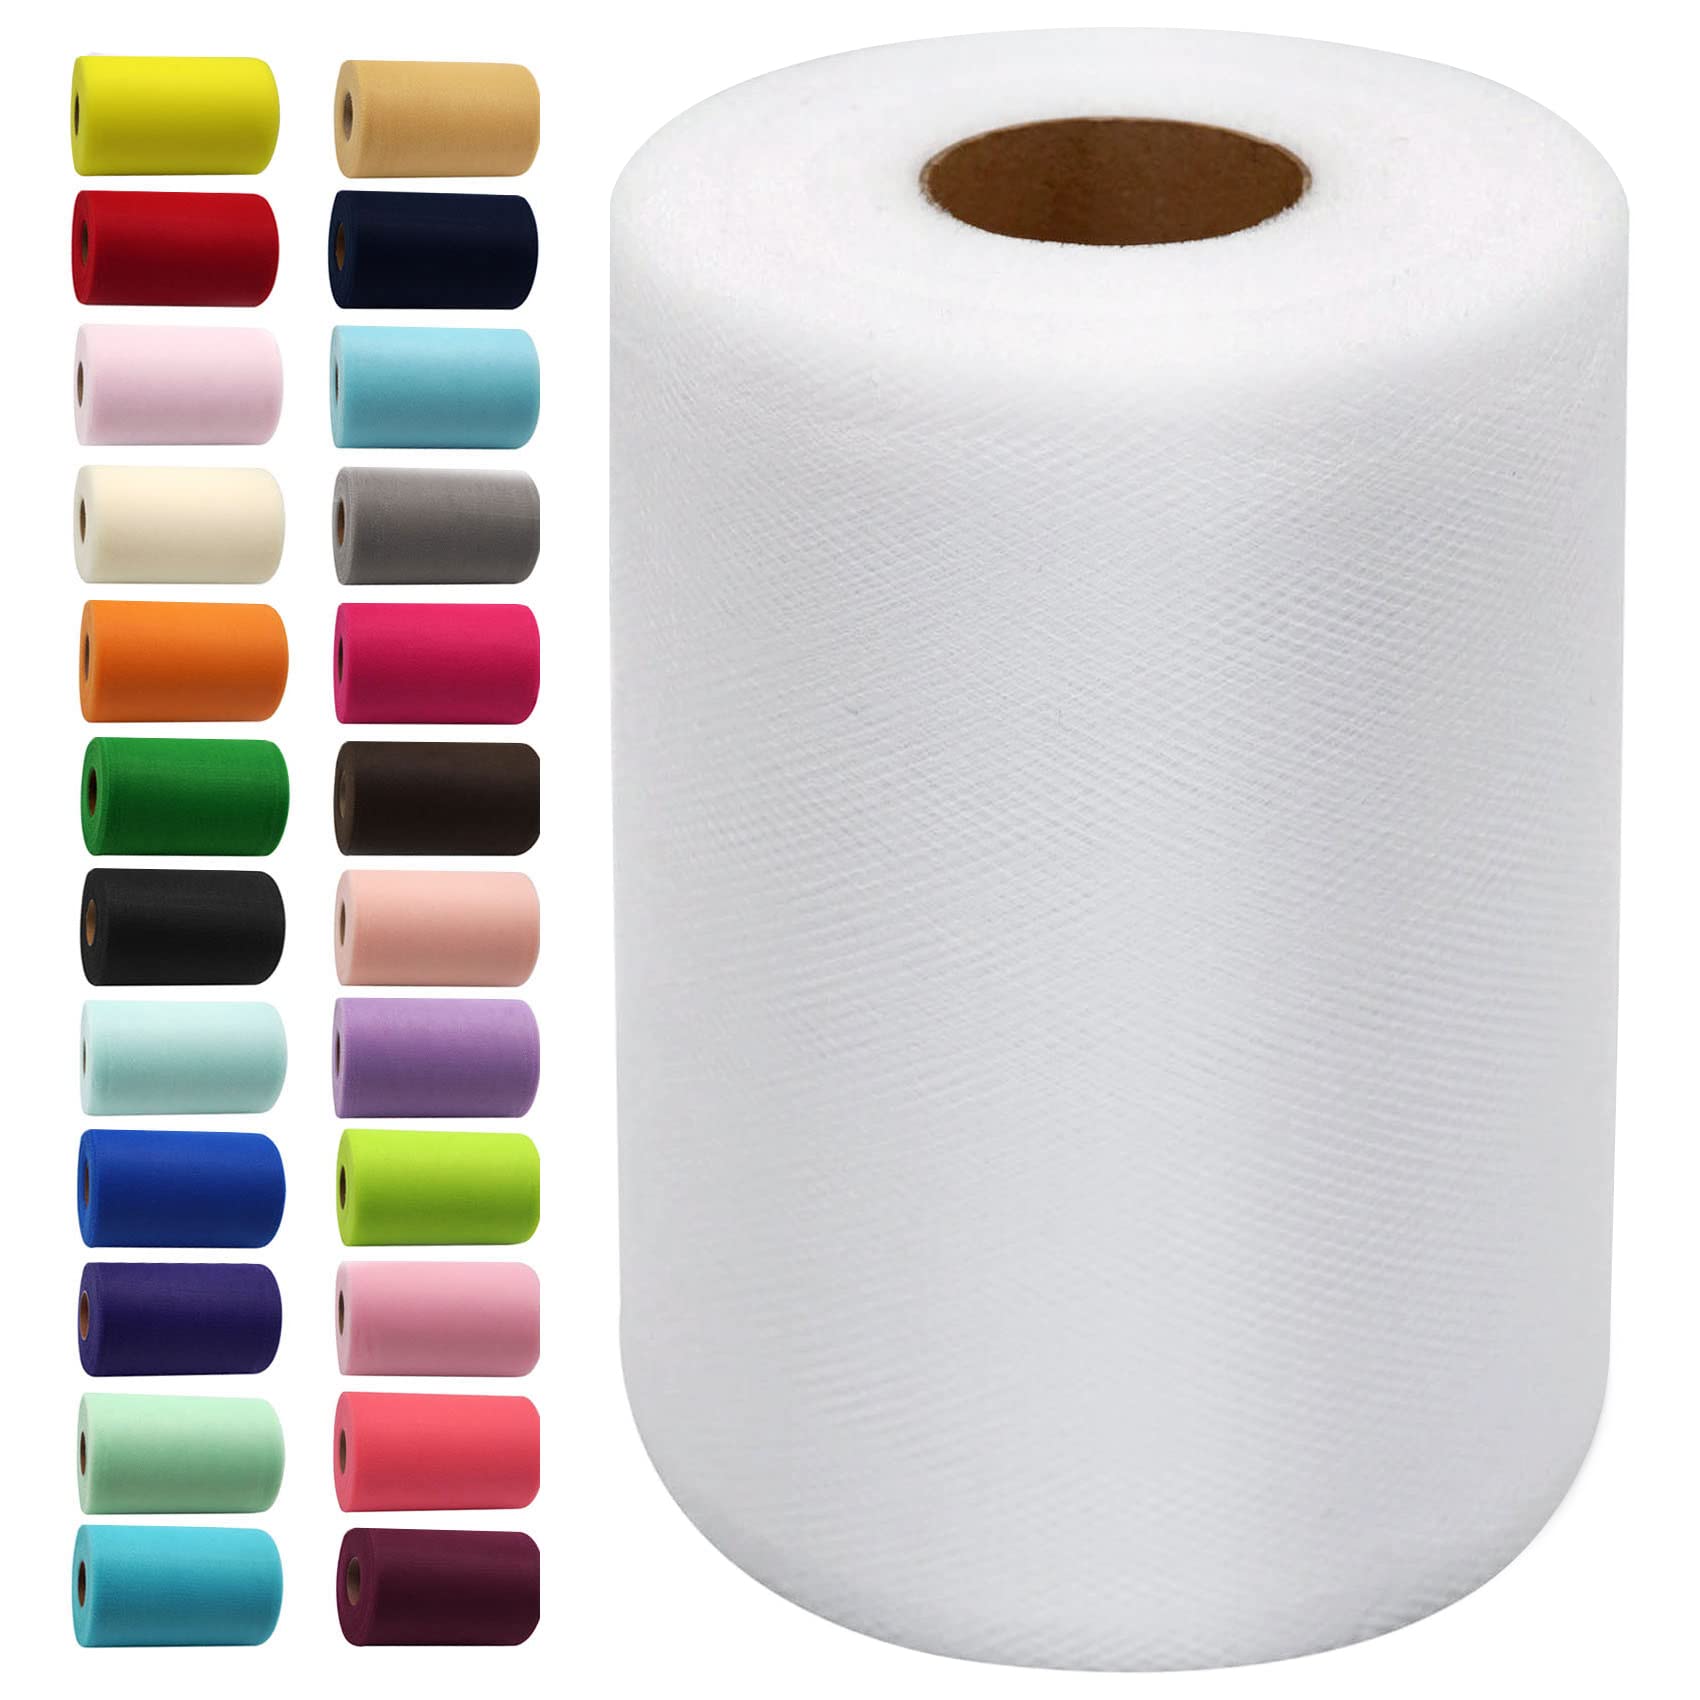 White Tulle Fabric Rolls 6 Inch by 100 Yards (300 feet) Fabric